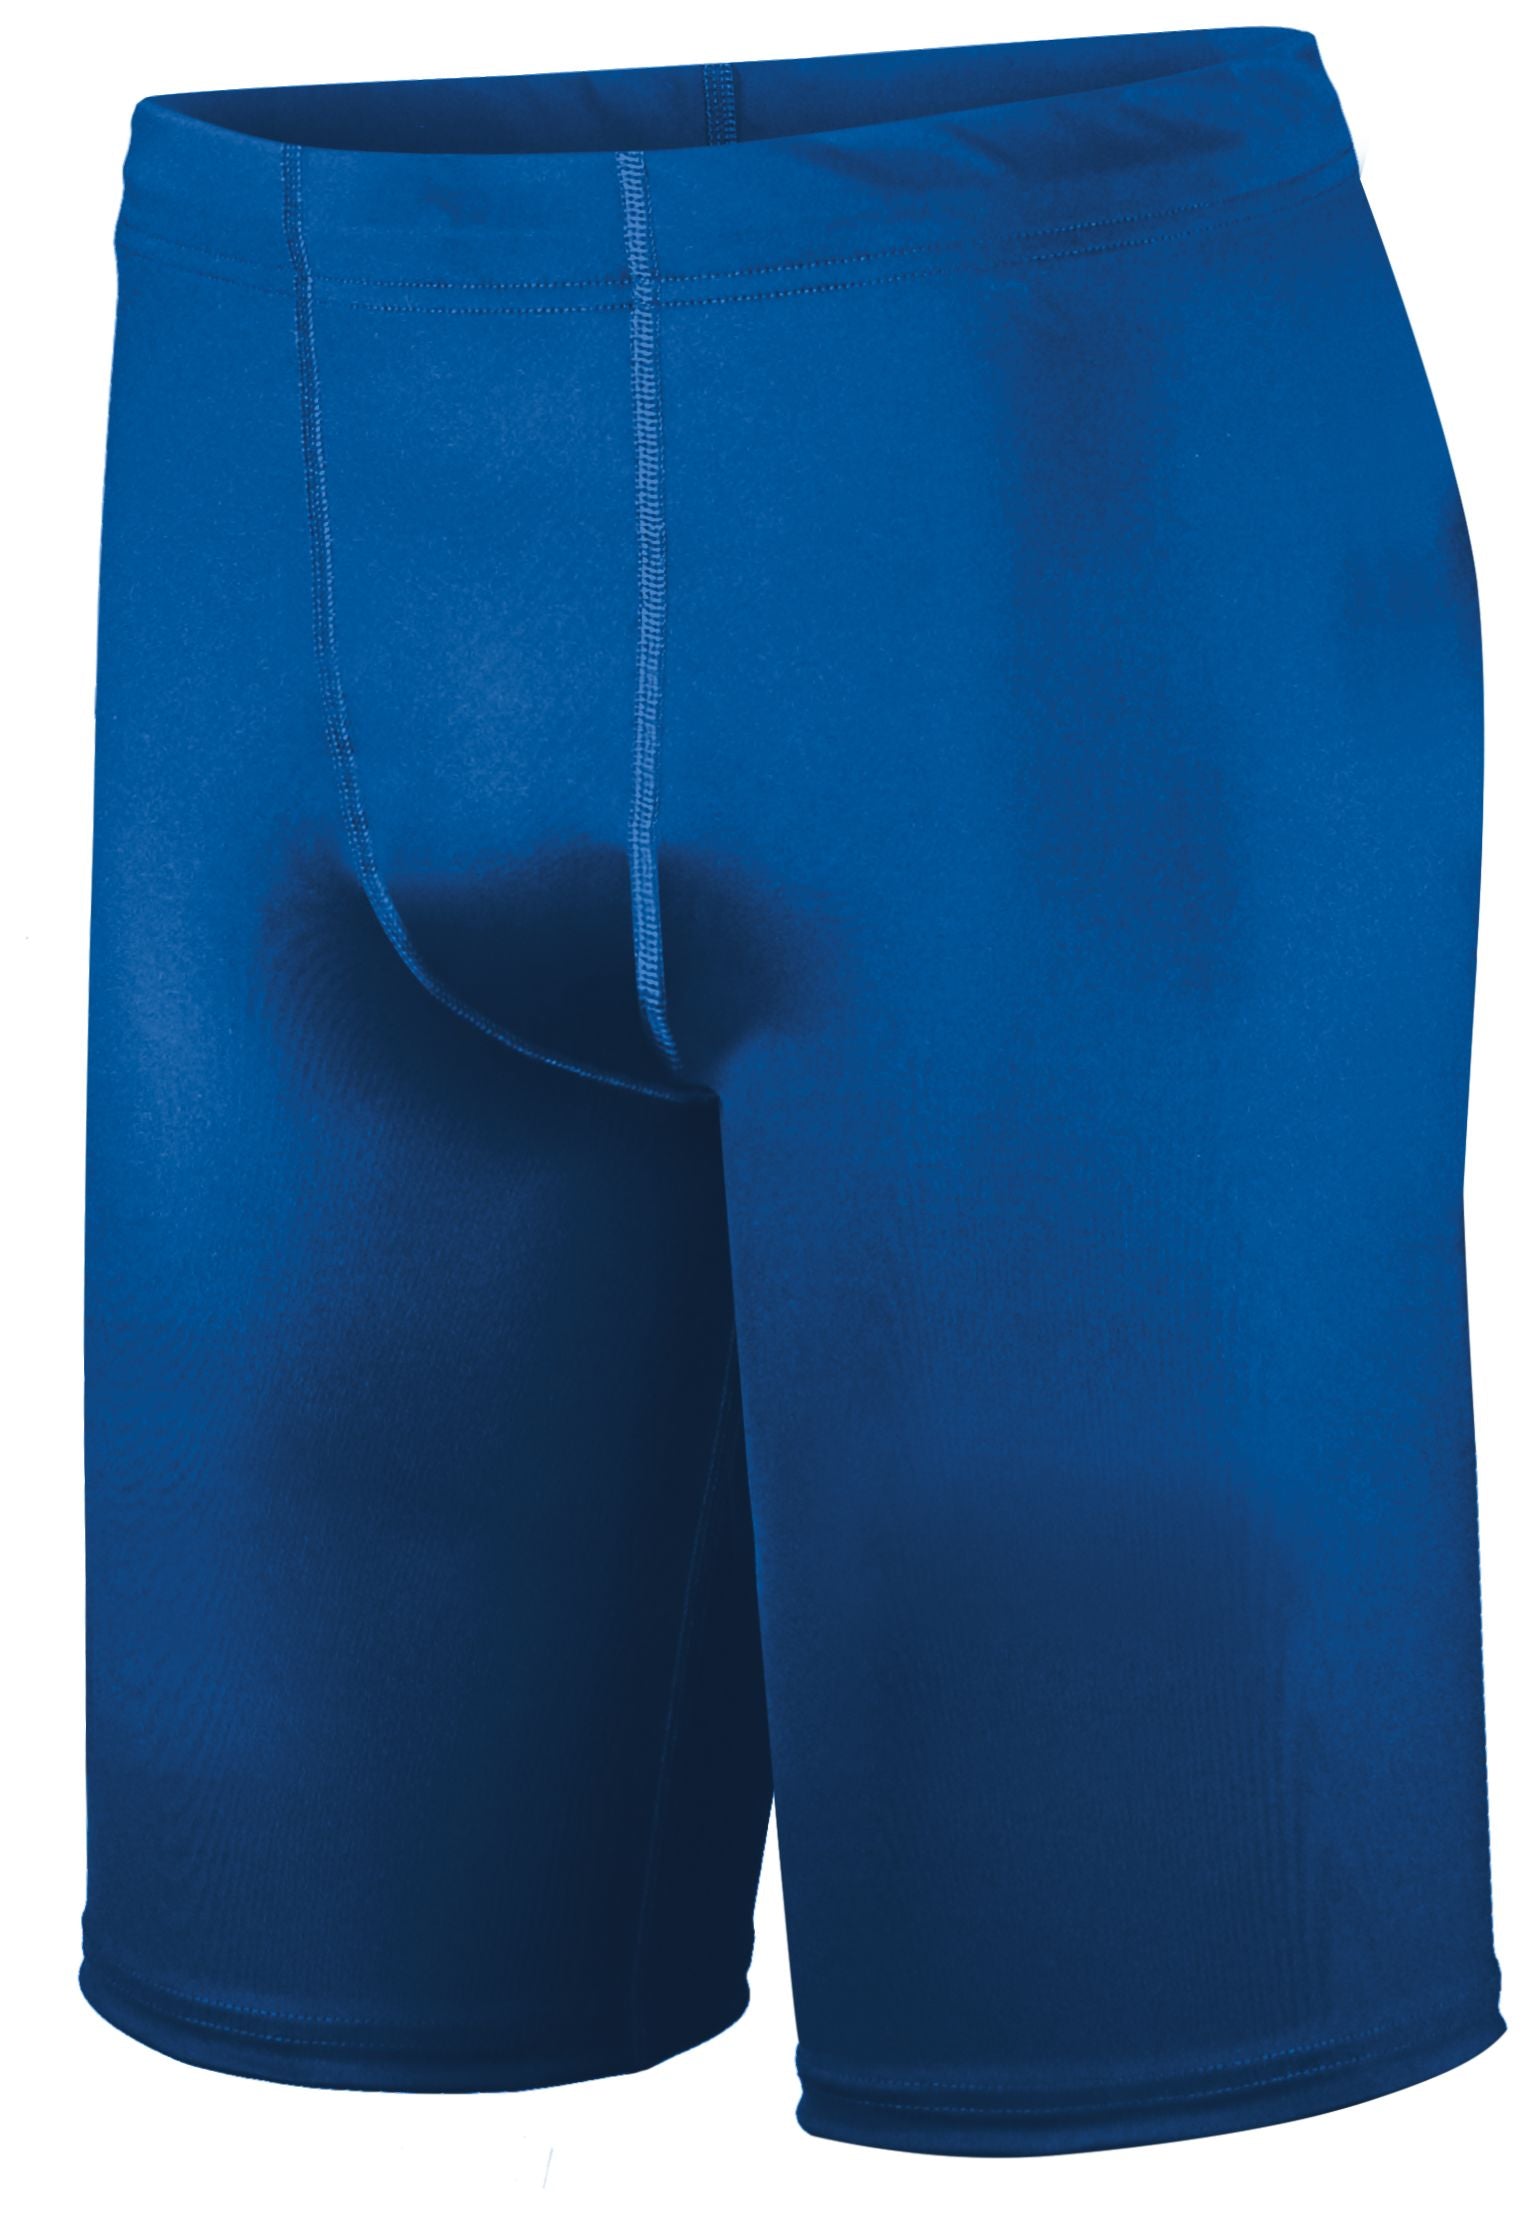 Holloway Pr Max Compression Shorts in Royal  -Part of the Adult, Adult-Shorts, Track-Field, Holloway product lines at KanaleyCreations.com